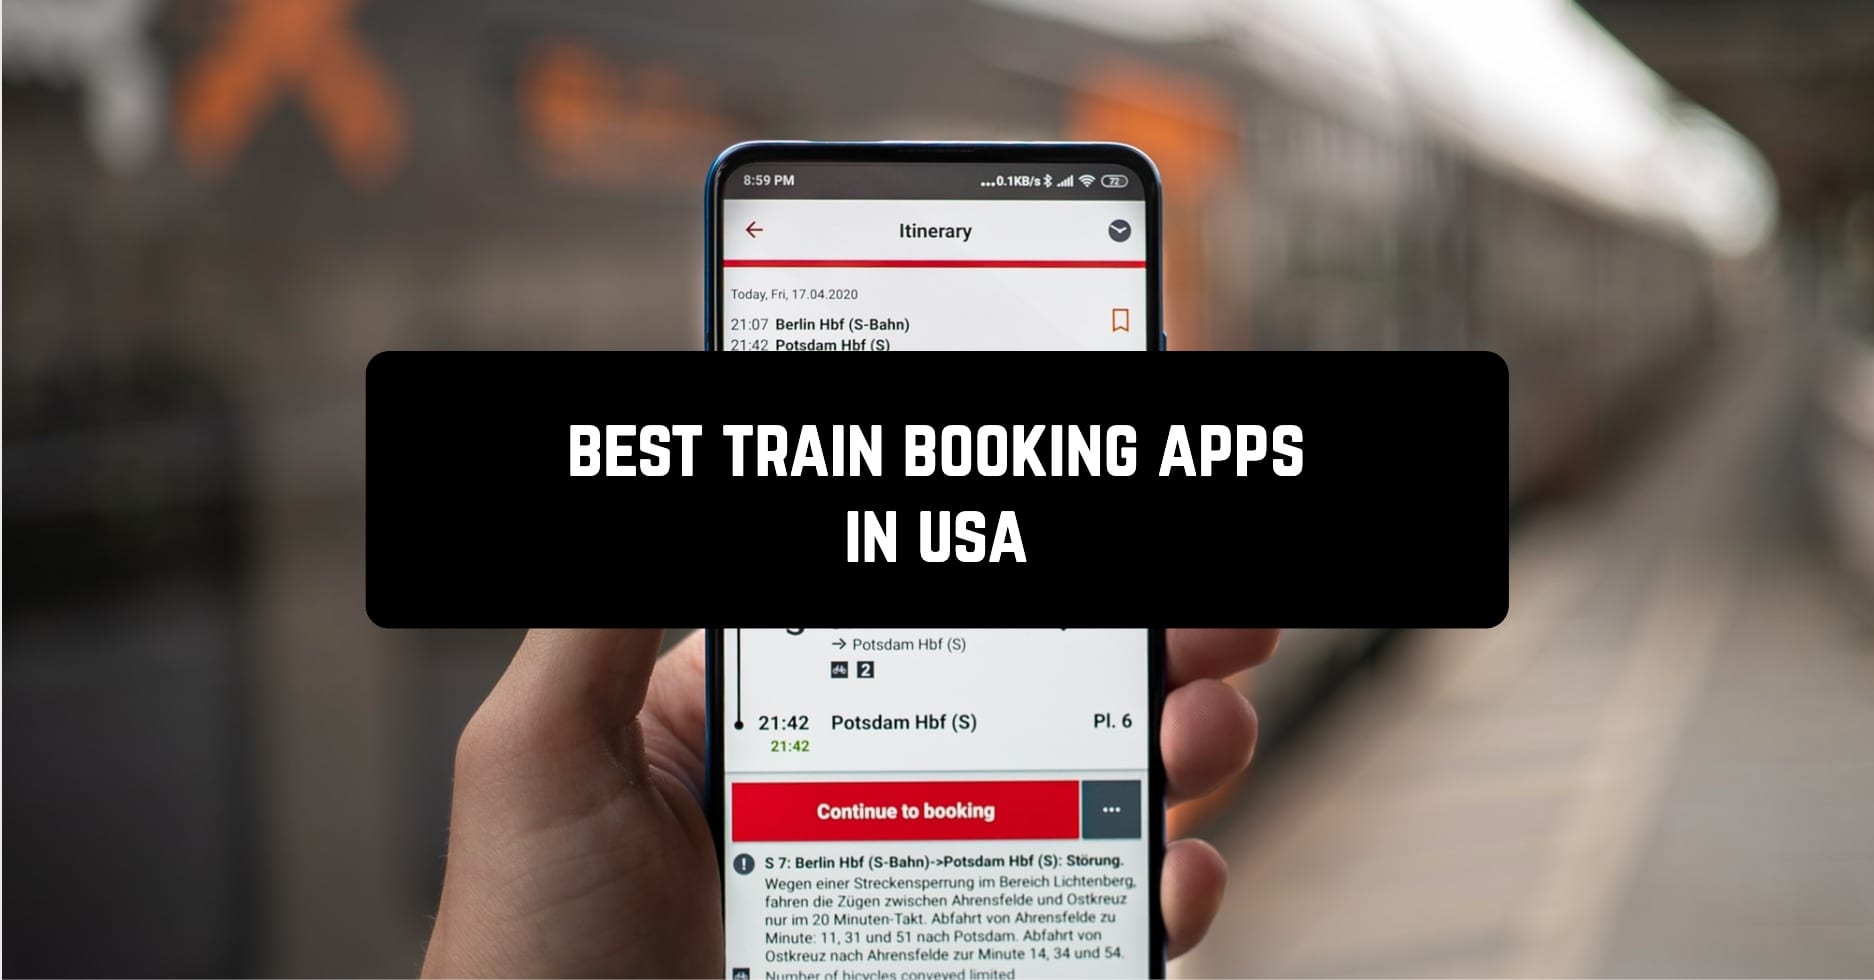 Best train booking apps in USA